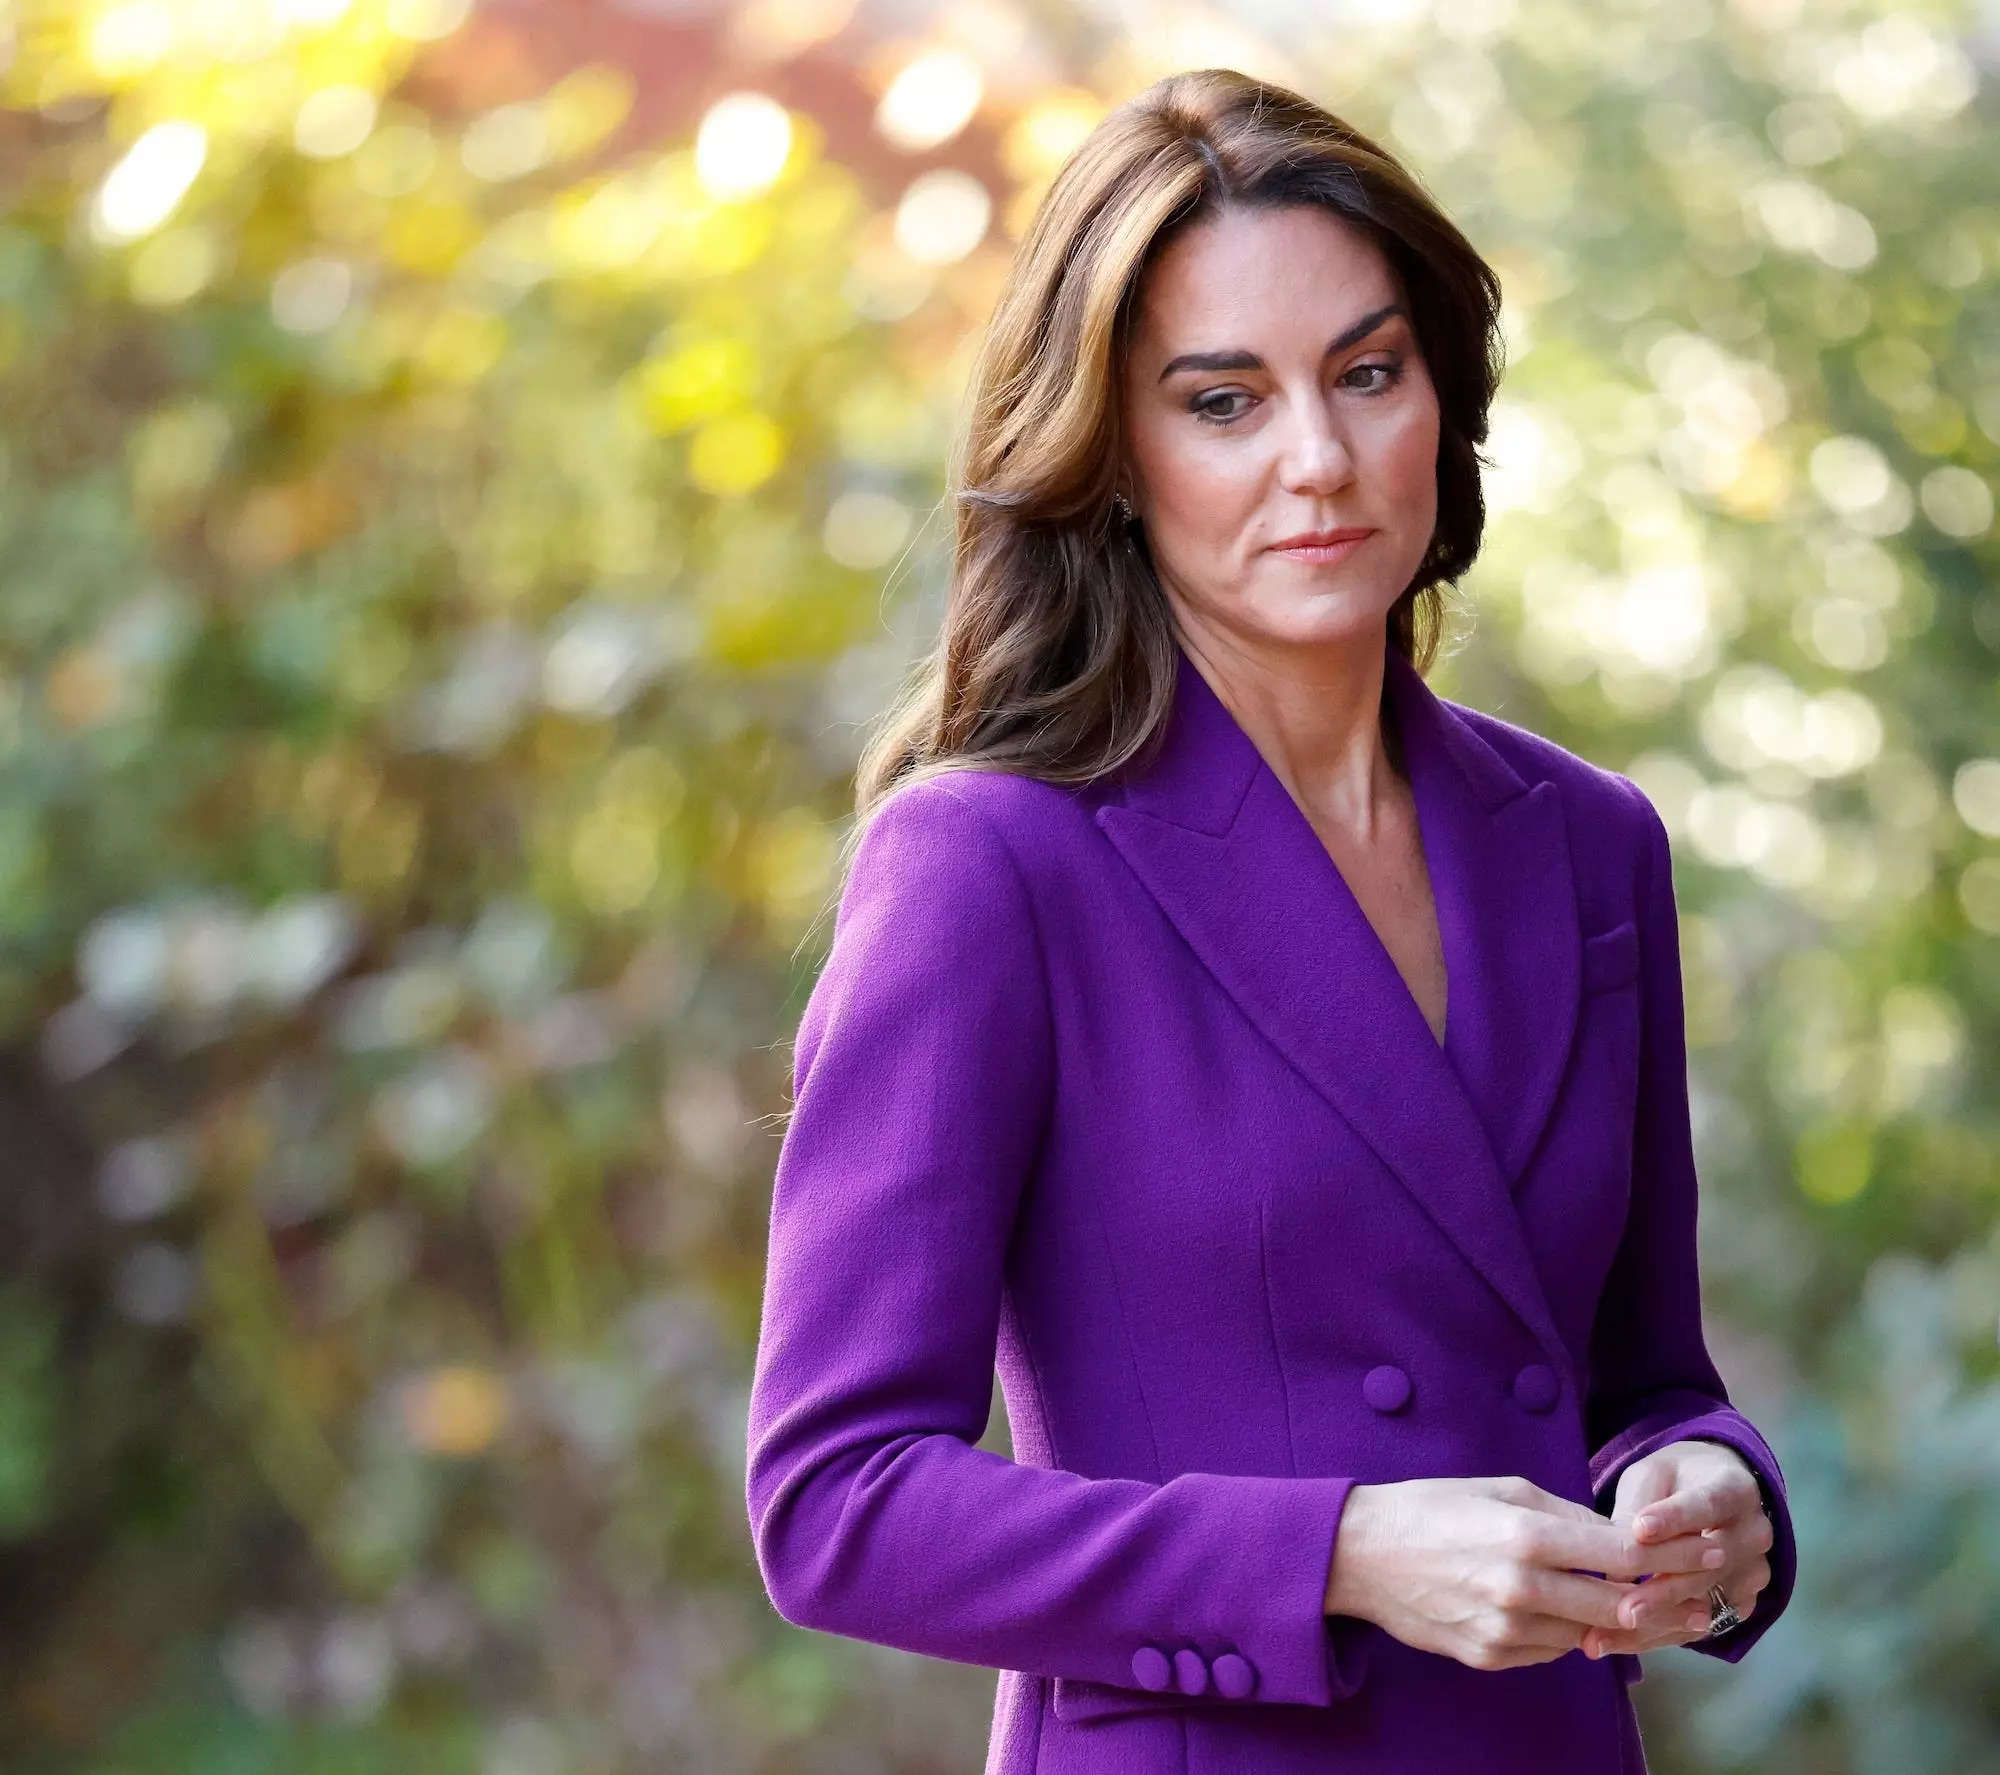 Kate Middleton looks down in a purple suit.